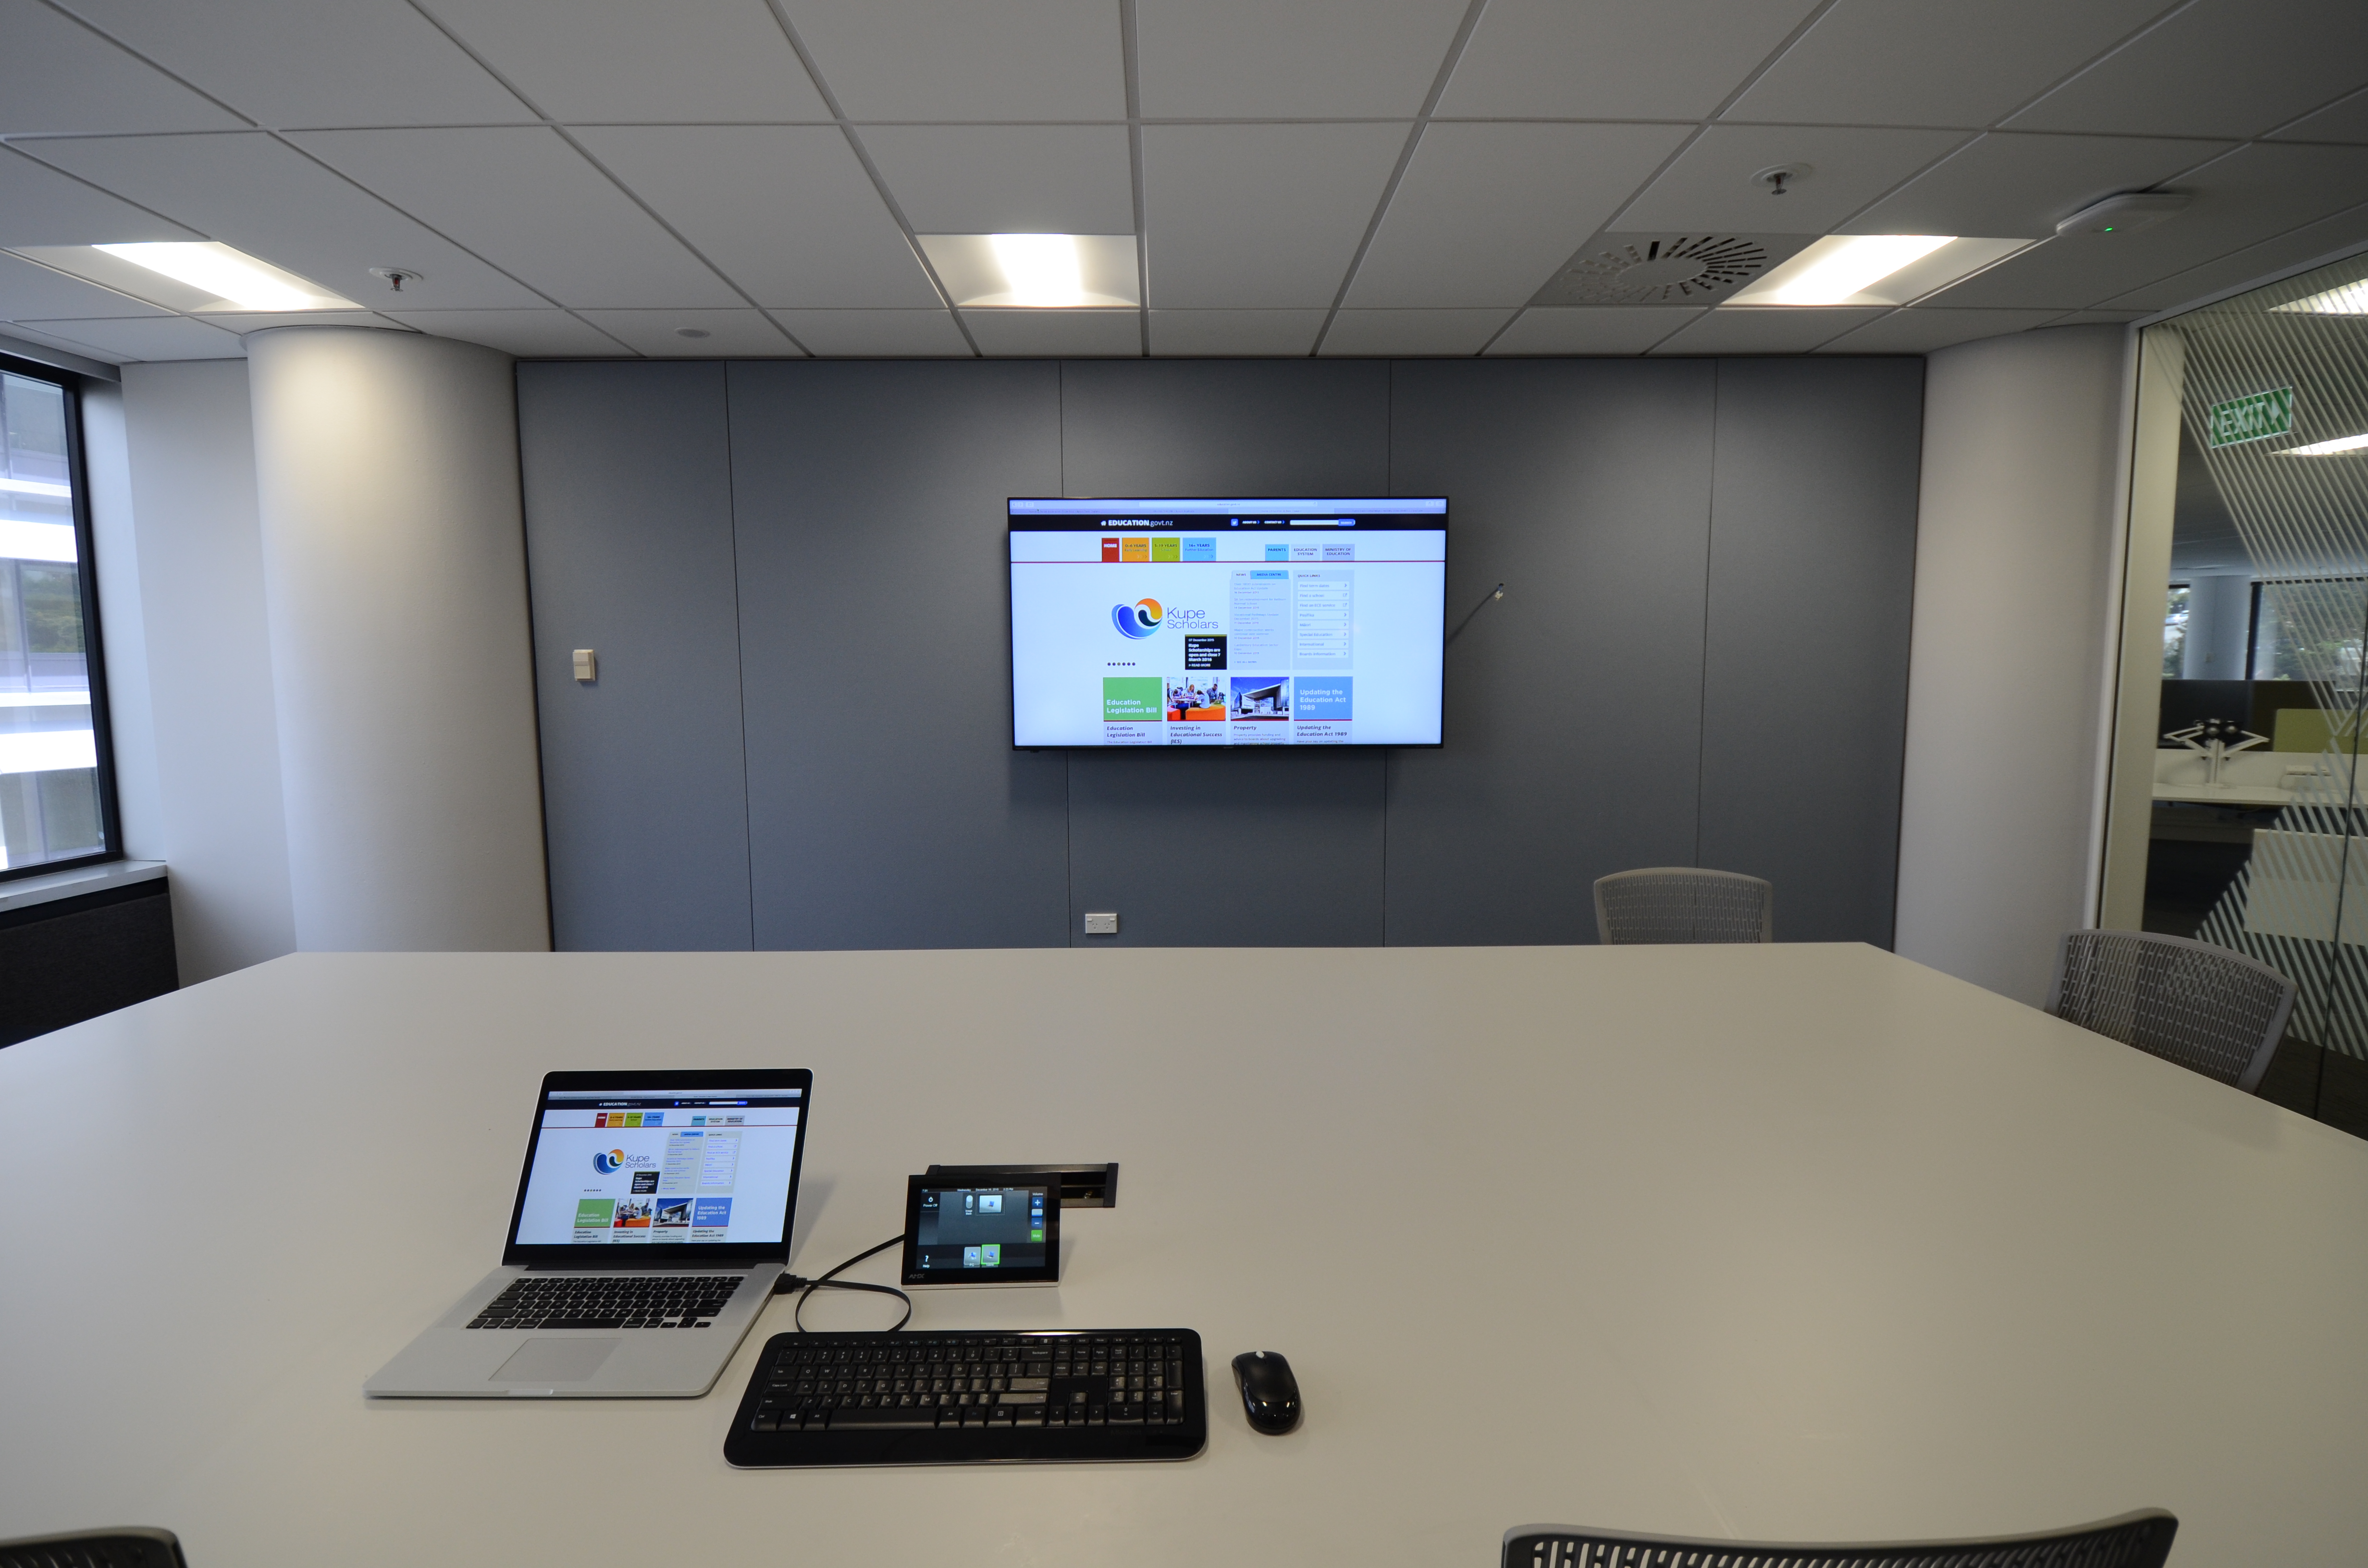 HARMAN Professional Solutions Delivers An Elegant Corporate AV Experience at New Zealand Ministry of Education